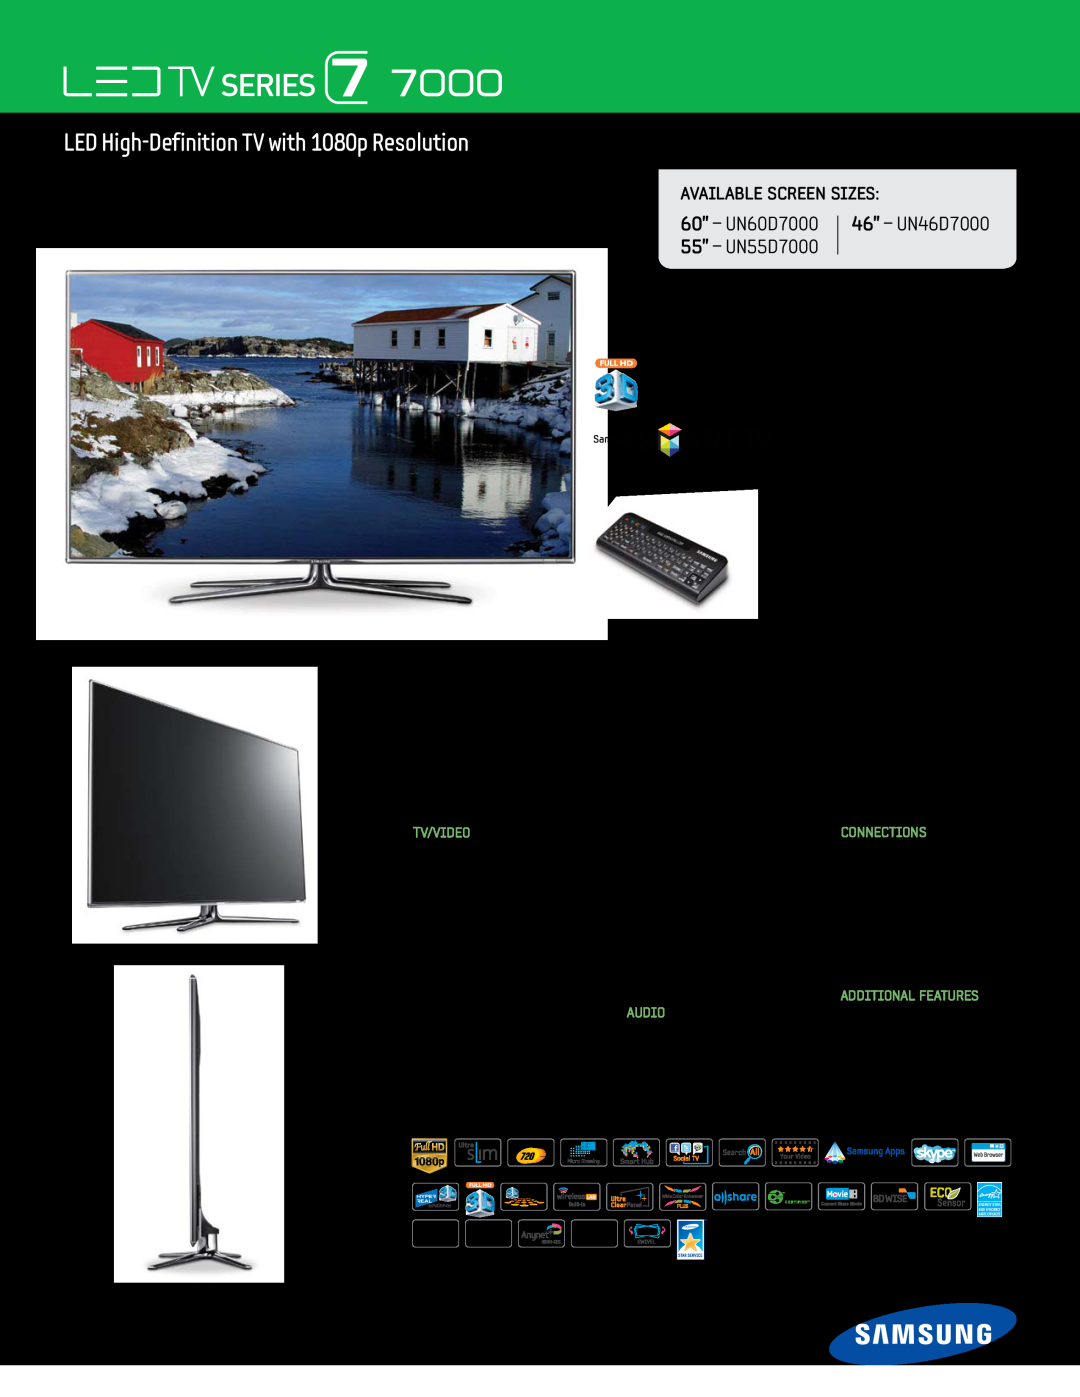 Samsung UN55D7000 manual 46” - UN46D7000, LED High-Definition TV with 1080p Resolution, Available Screen Sizes, Tv/Video 